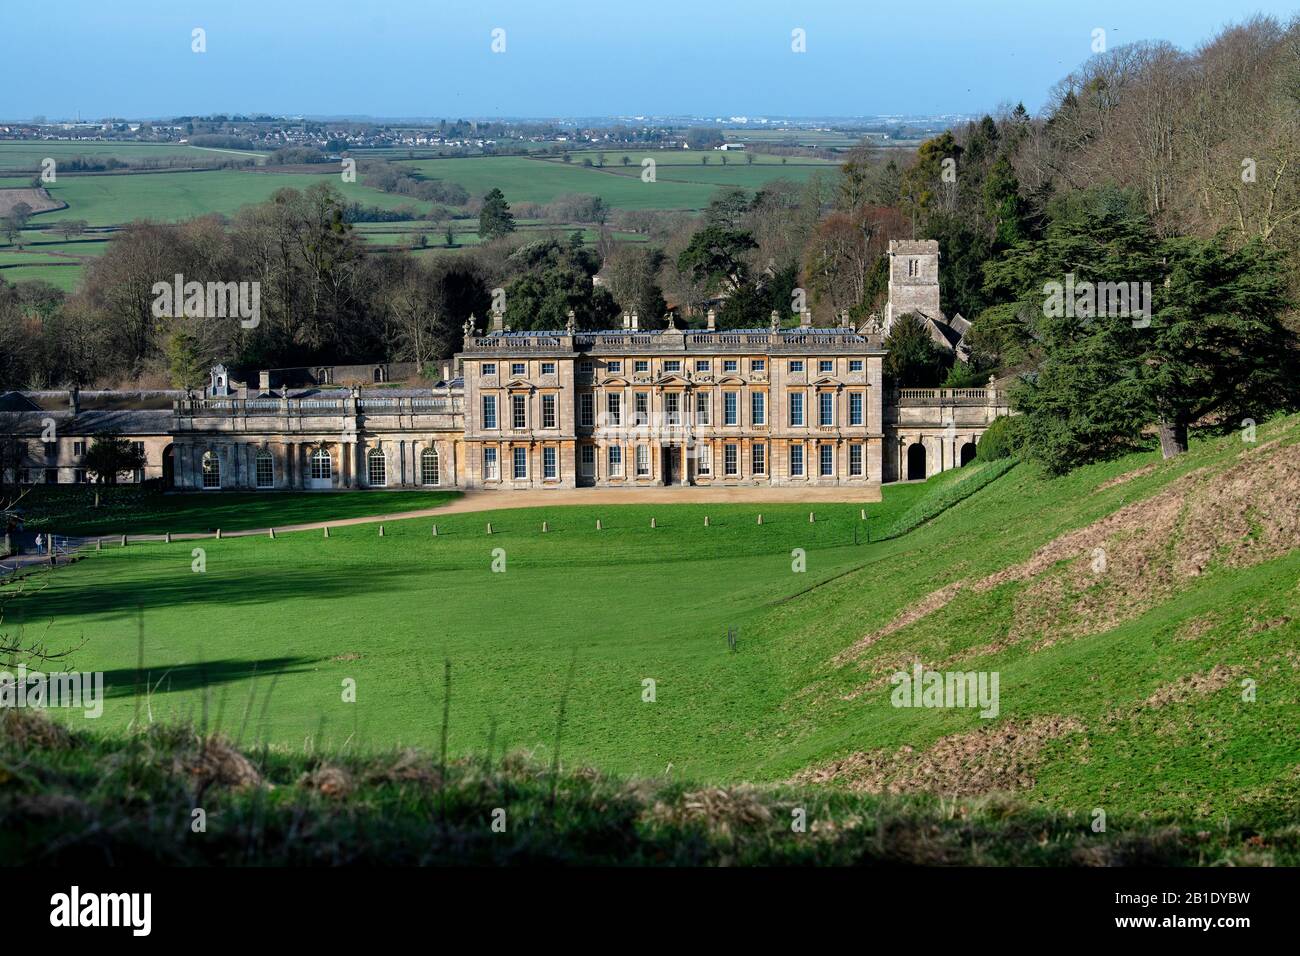 Dyrham Park is a baroque country house in an ancient deer park near the village of Dyrham in South Gloucestershire, England. Stock Photo